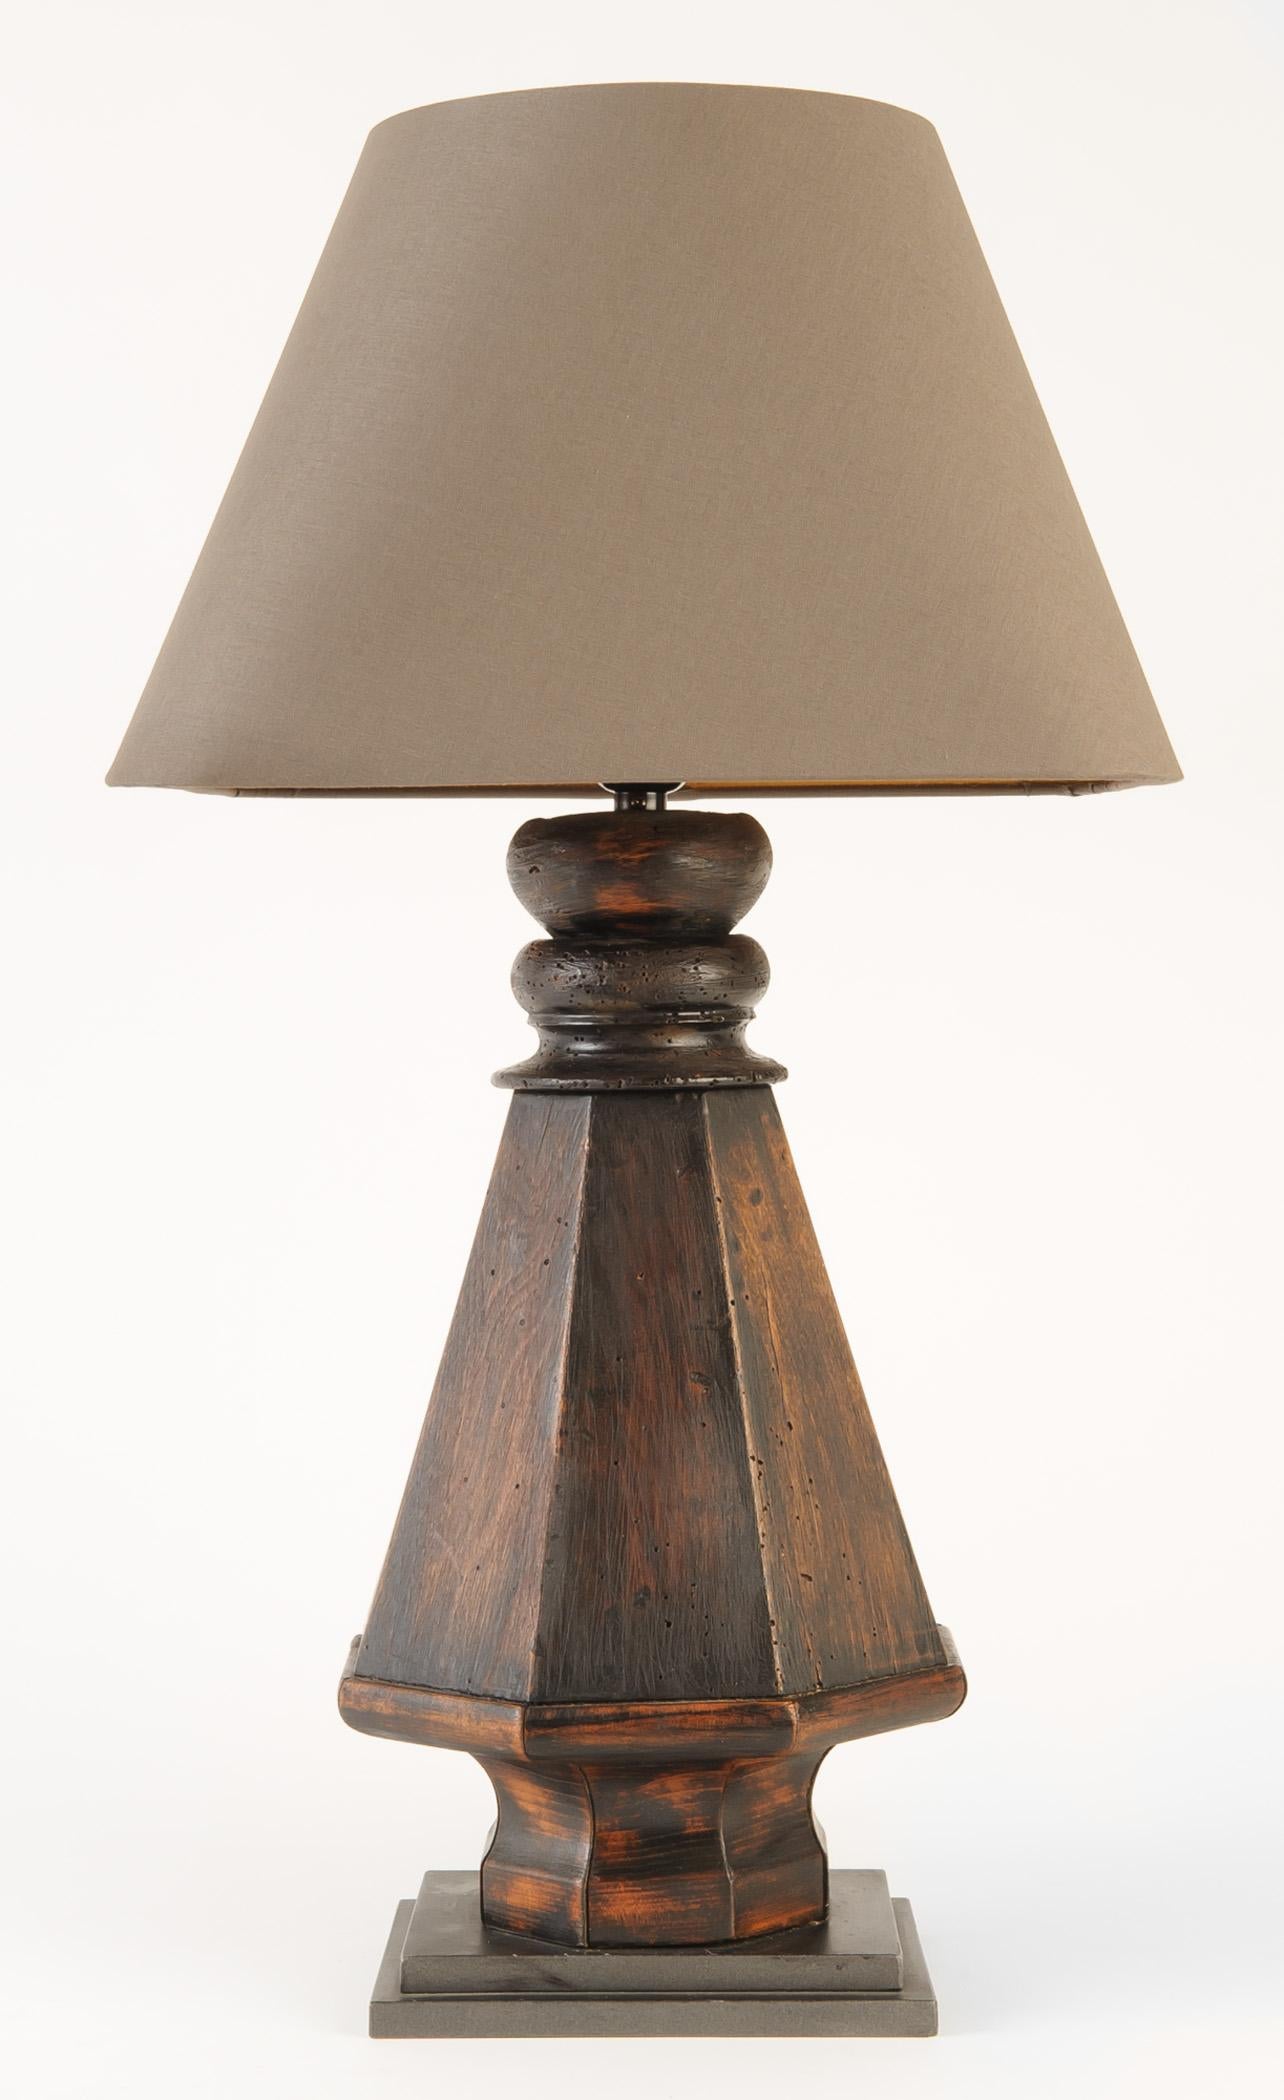 This pair of wood lamps are created from the legs of a billiard table. The base is mounted on a graduated metal squares. The custom taupe linen shade is square with rounded corners and bronze paper liner. The lamp has high low control and is wired